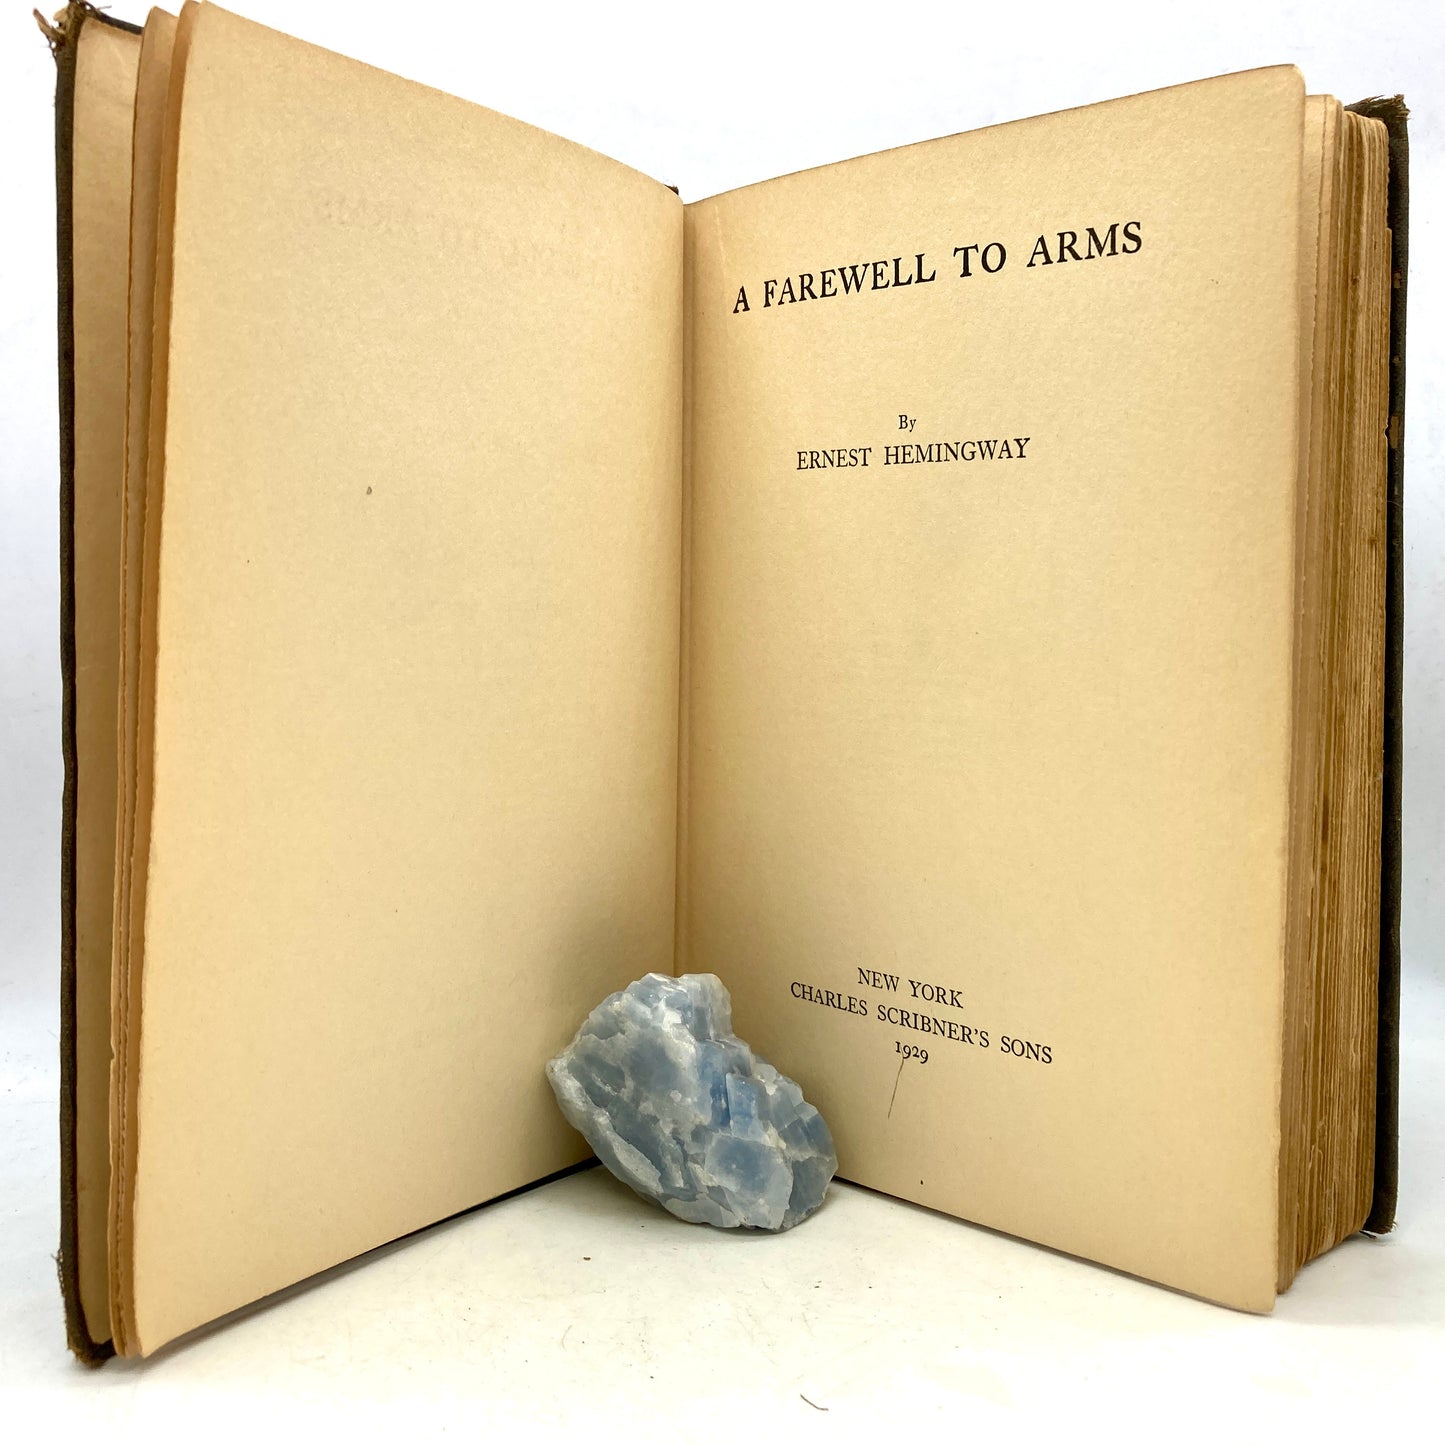 HEMINGWAY, Ernest "A Farewell to Arms" [Scribners, 1929] 1st Edition/5th Printing